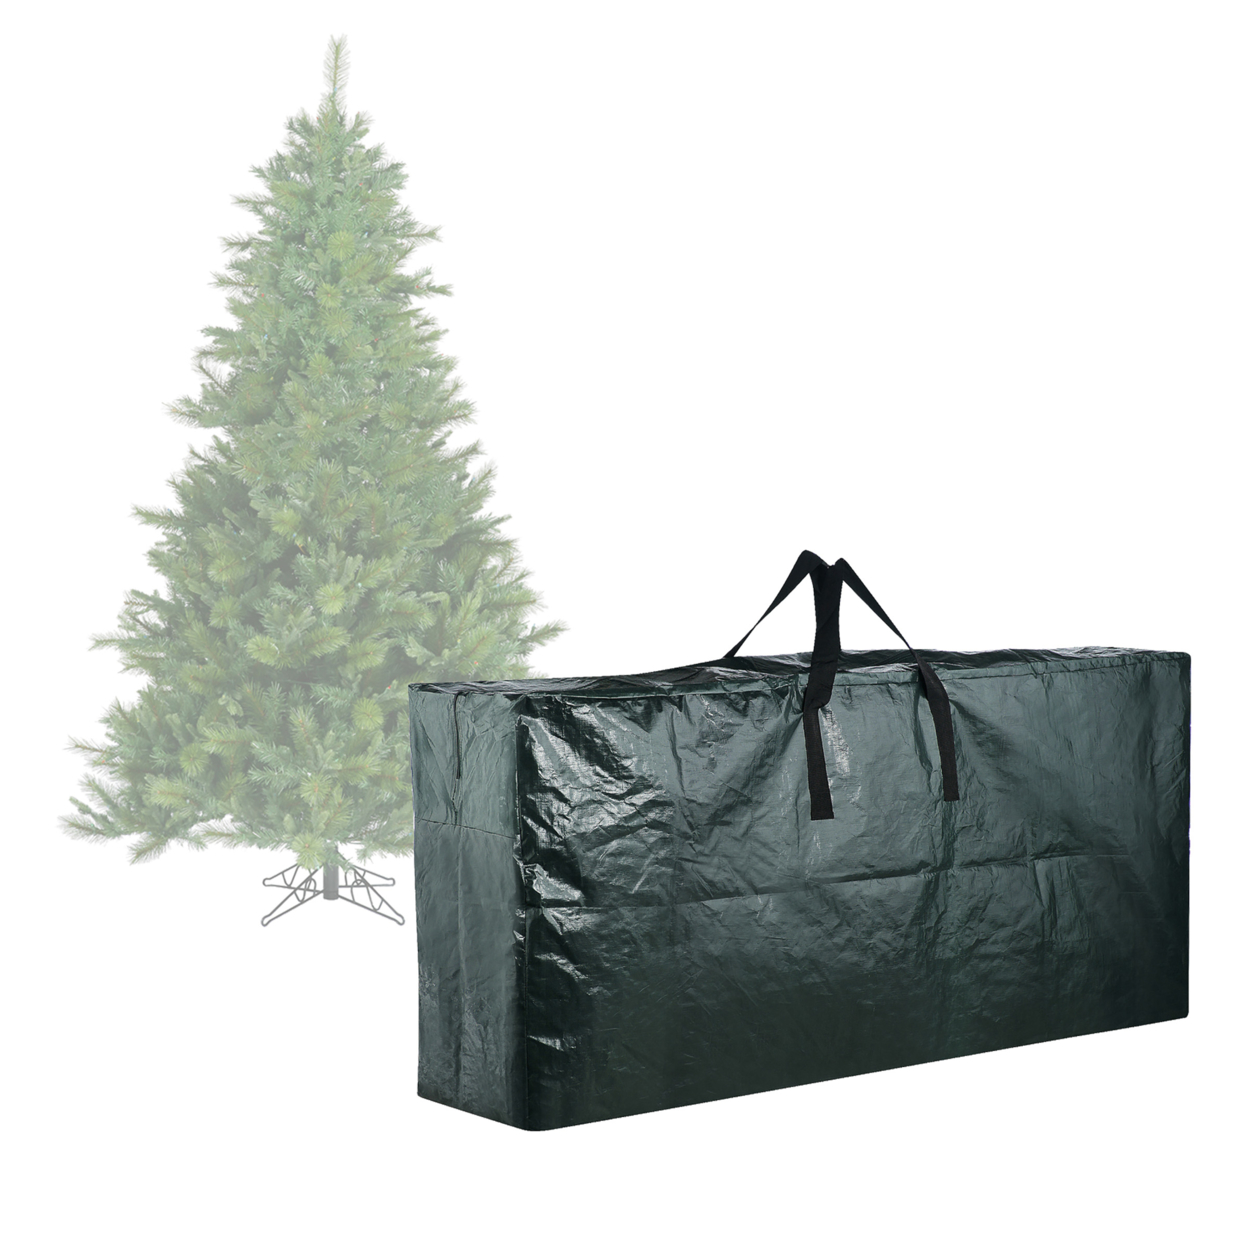 Elf Stor Premium Christmas Tree Bag Holiday Extra Large For up to 9 Ft Tree